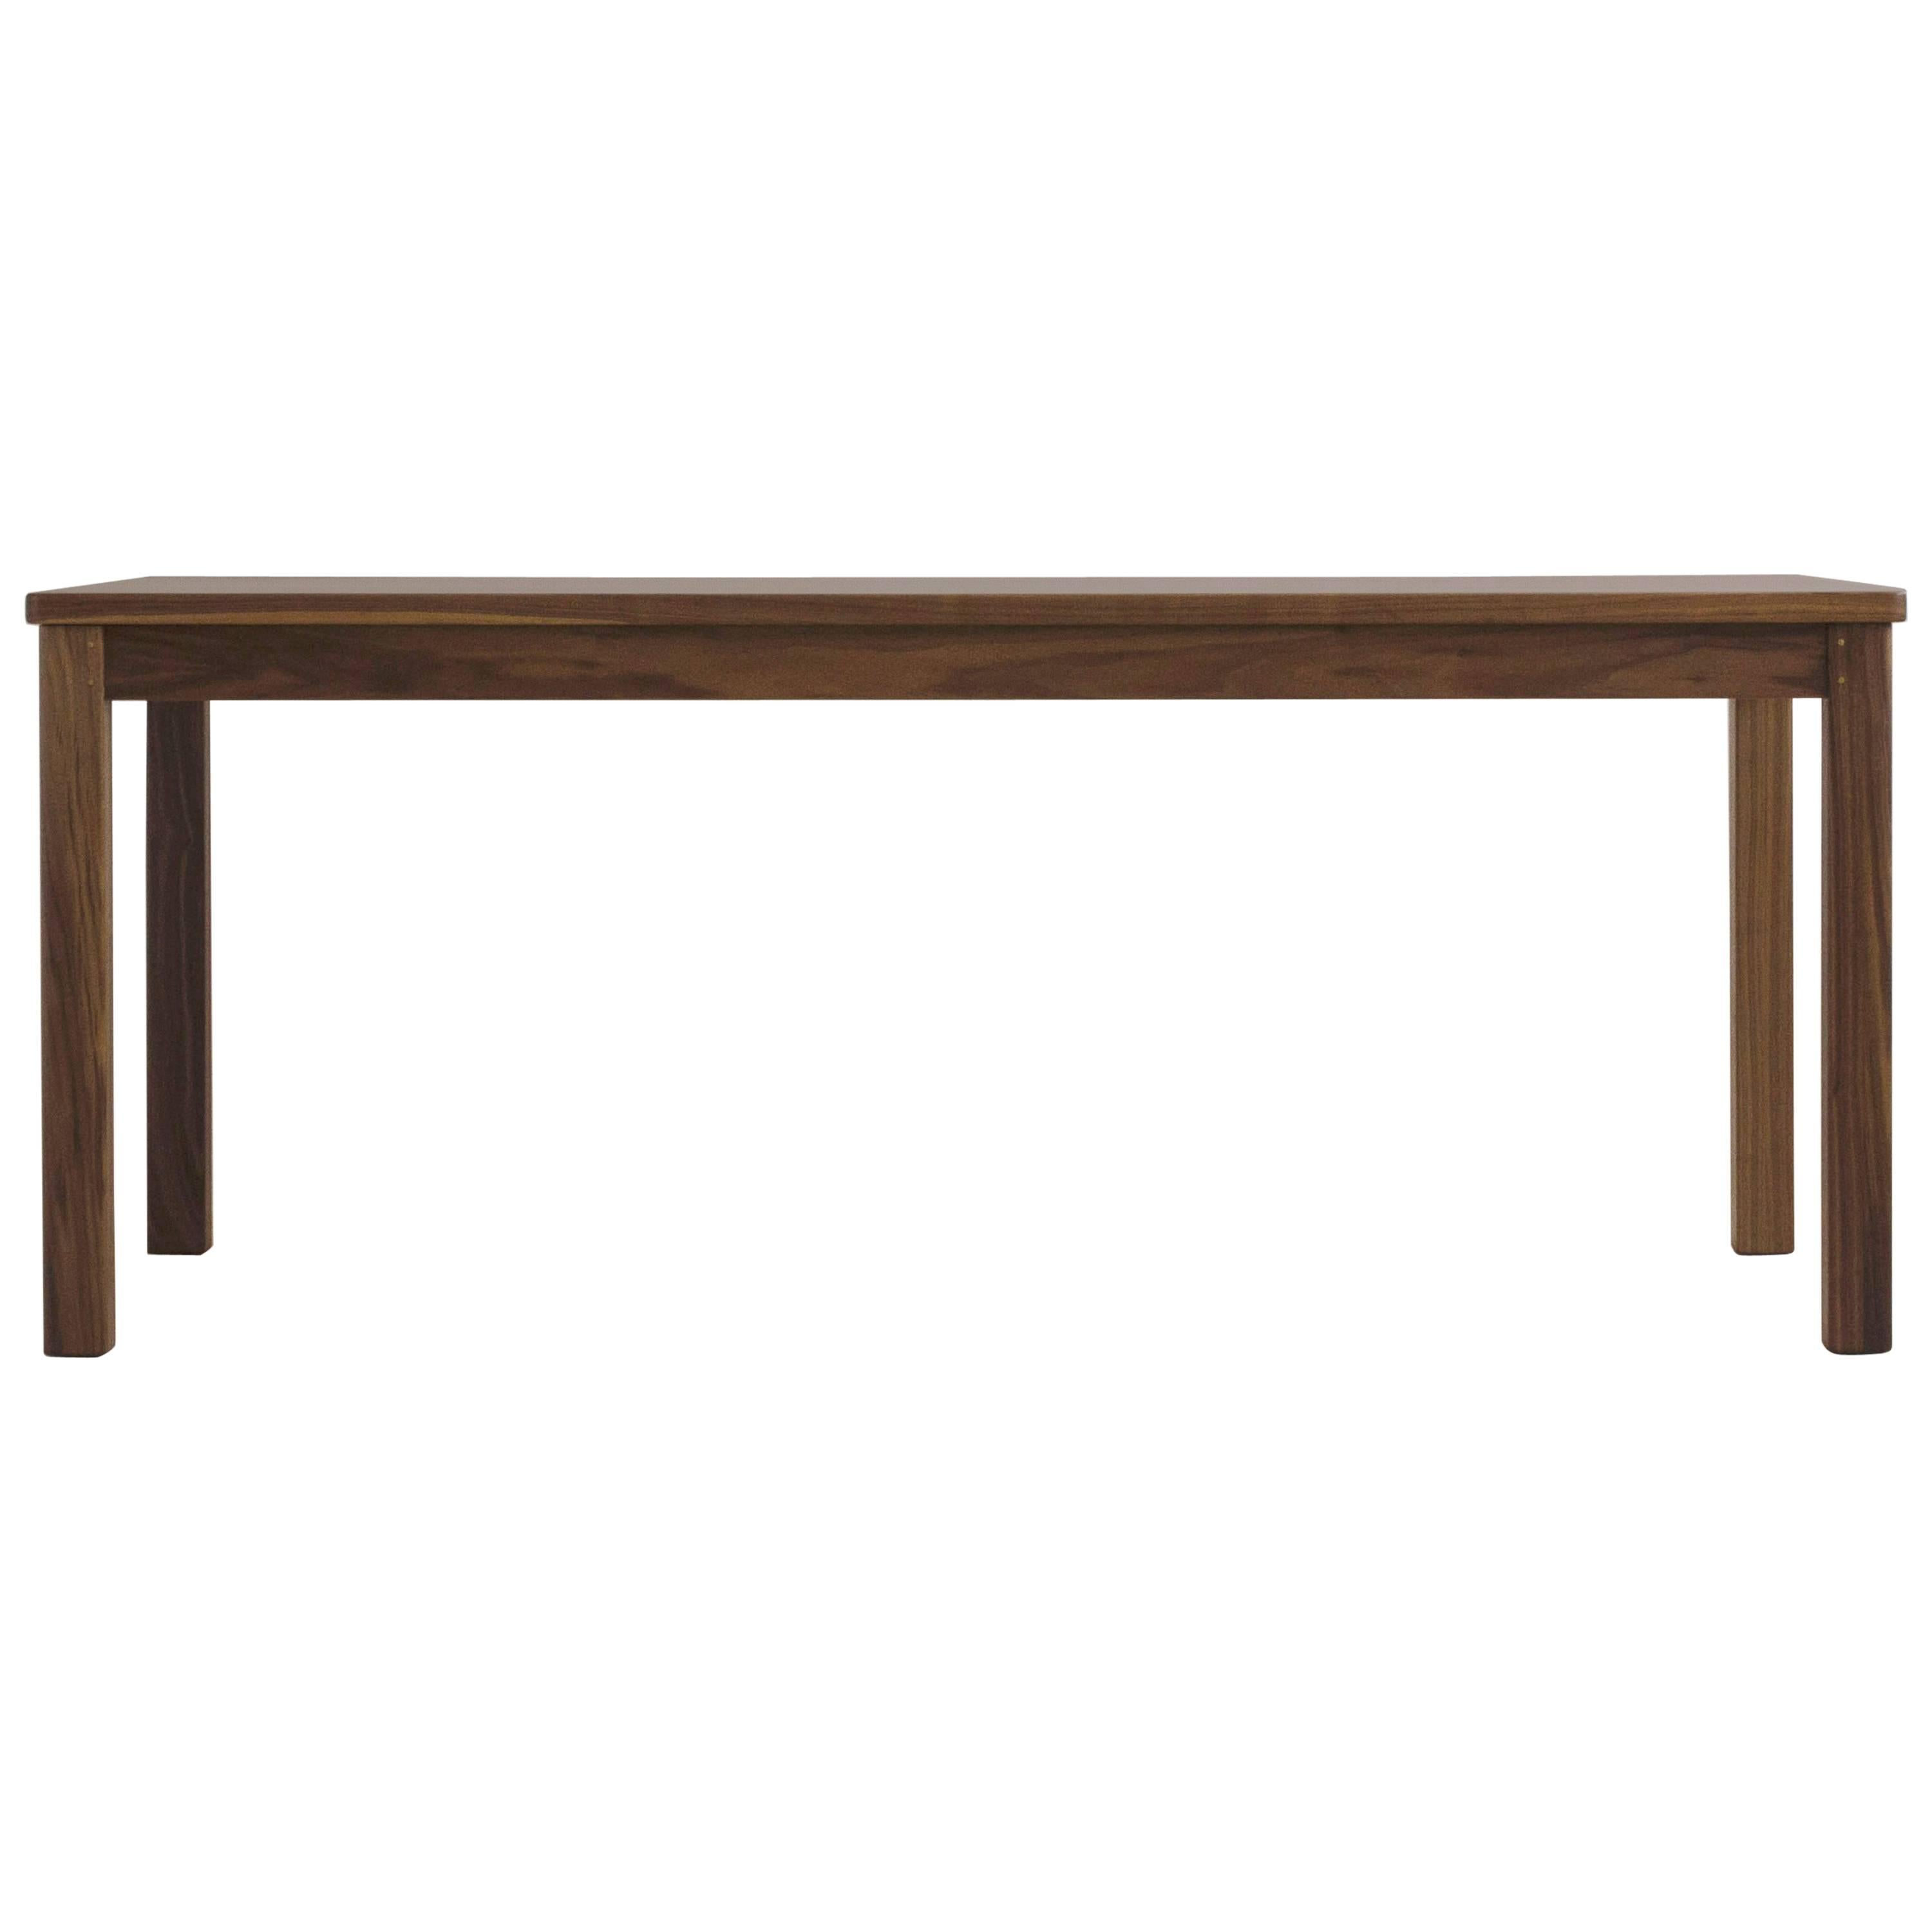 Large "Lore" Dining Table Solid-Wood, Black Walnut, Modern Shaker-Style For Sale